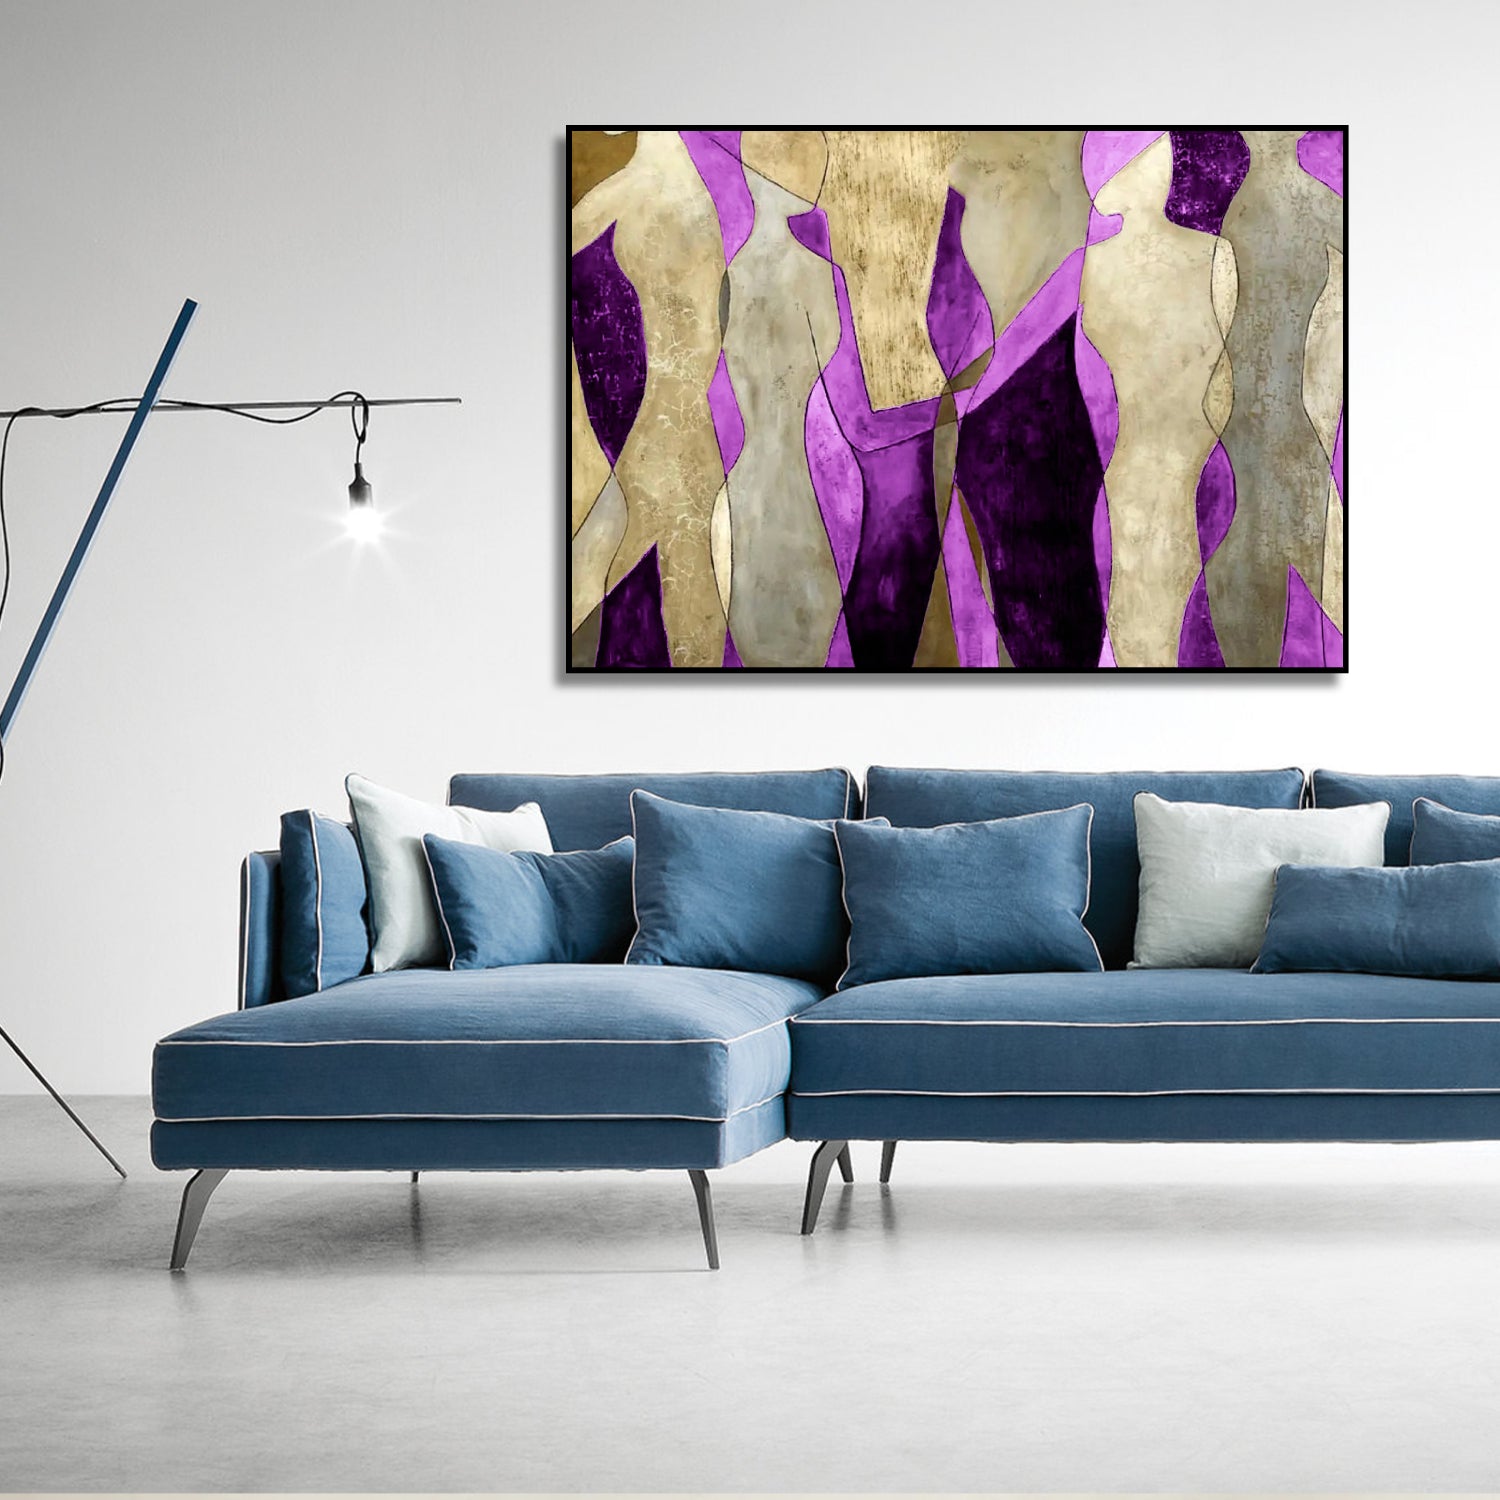 Acrylic Pink and Golden Dancing Figures Abstract Art